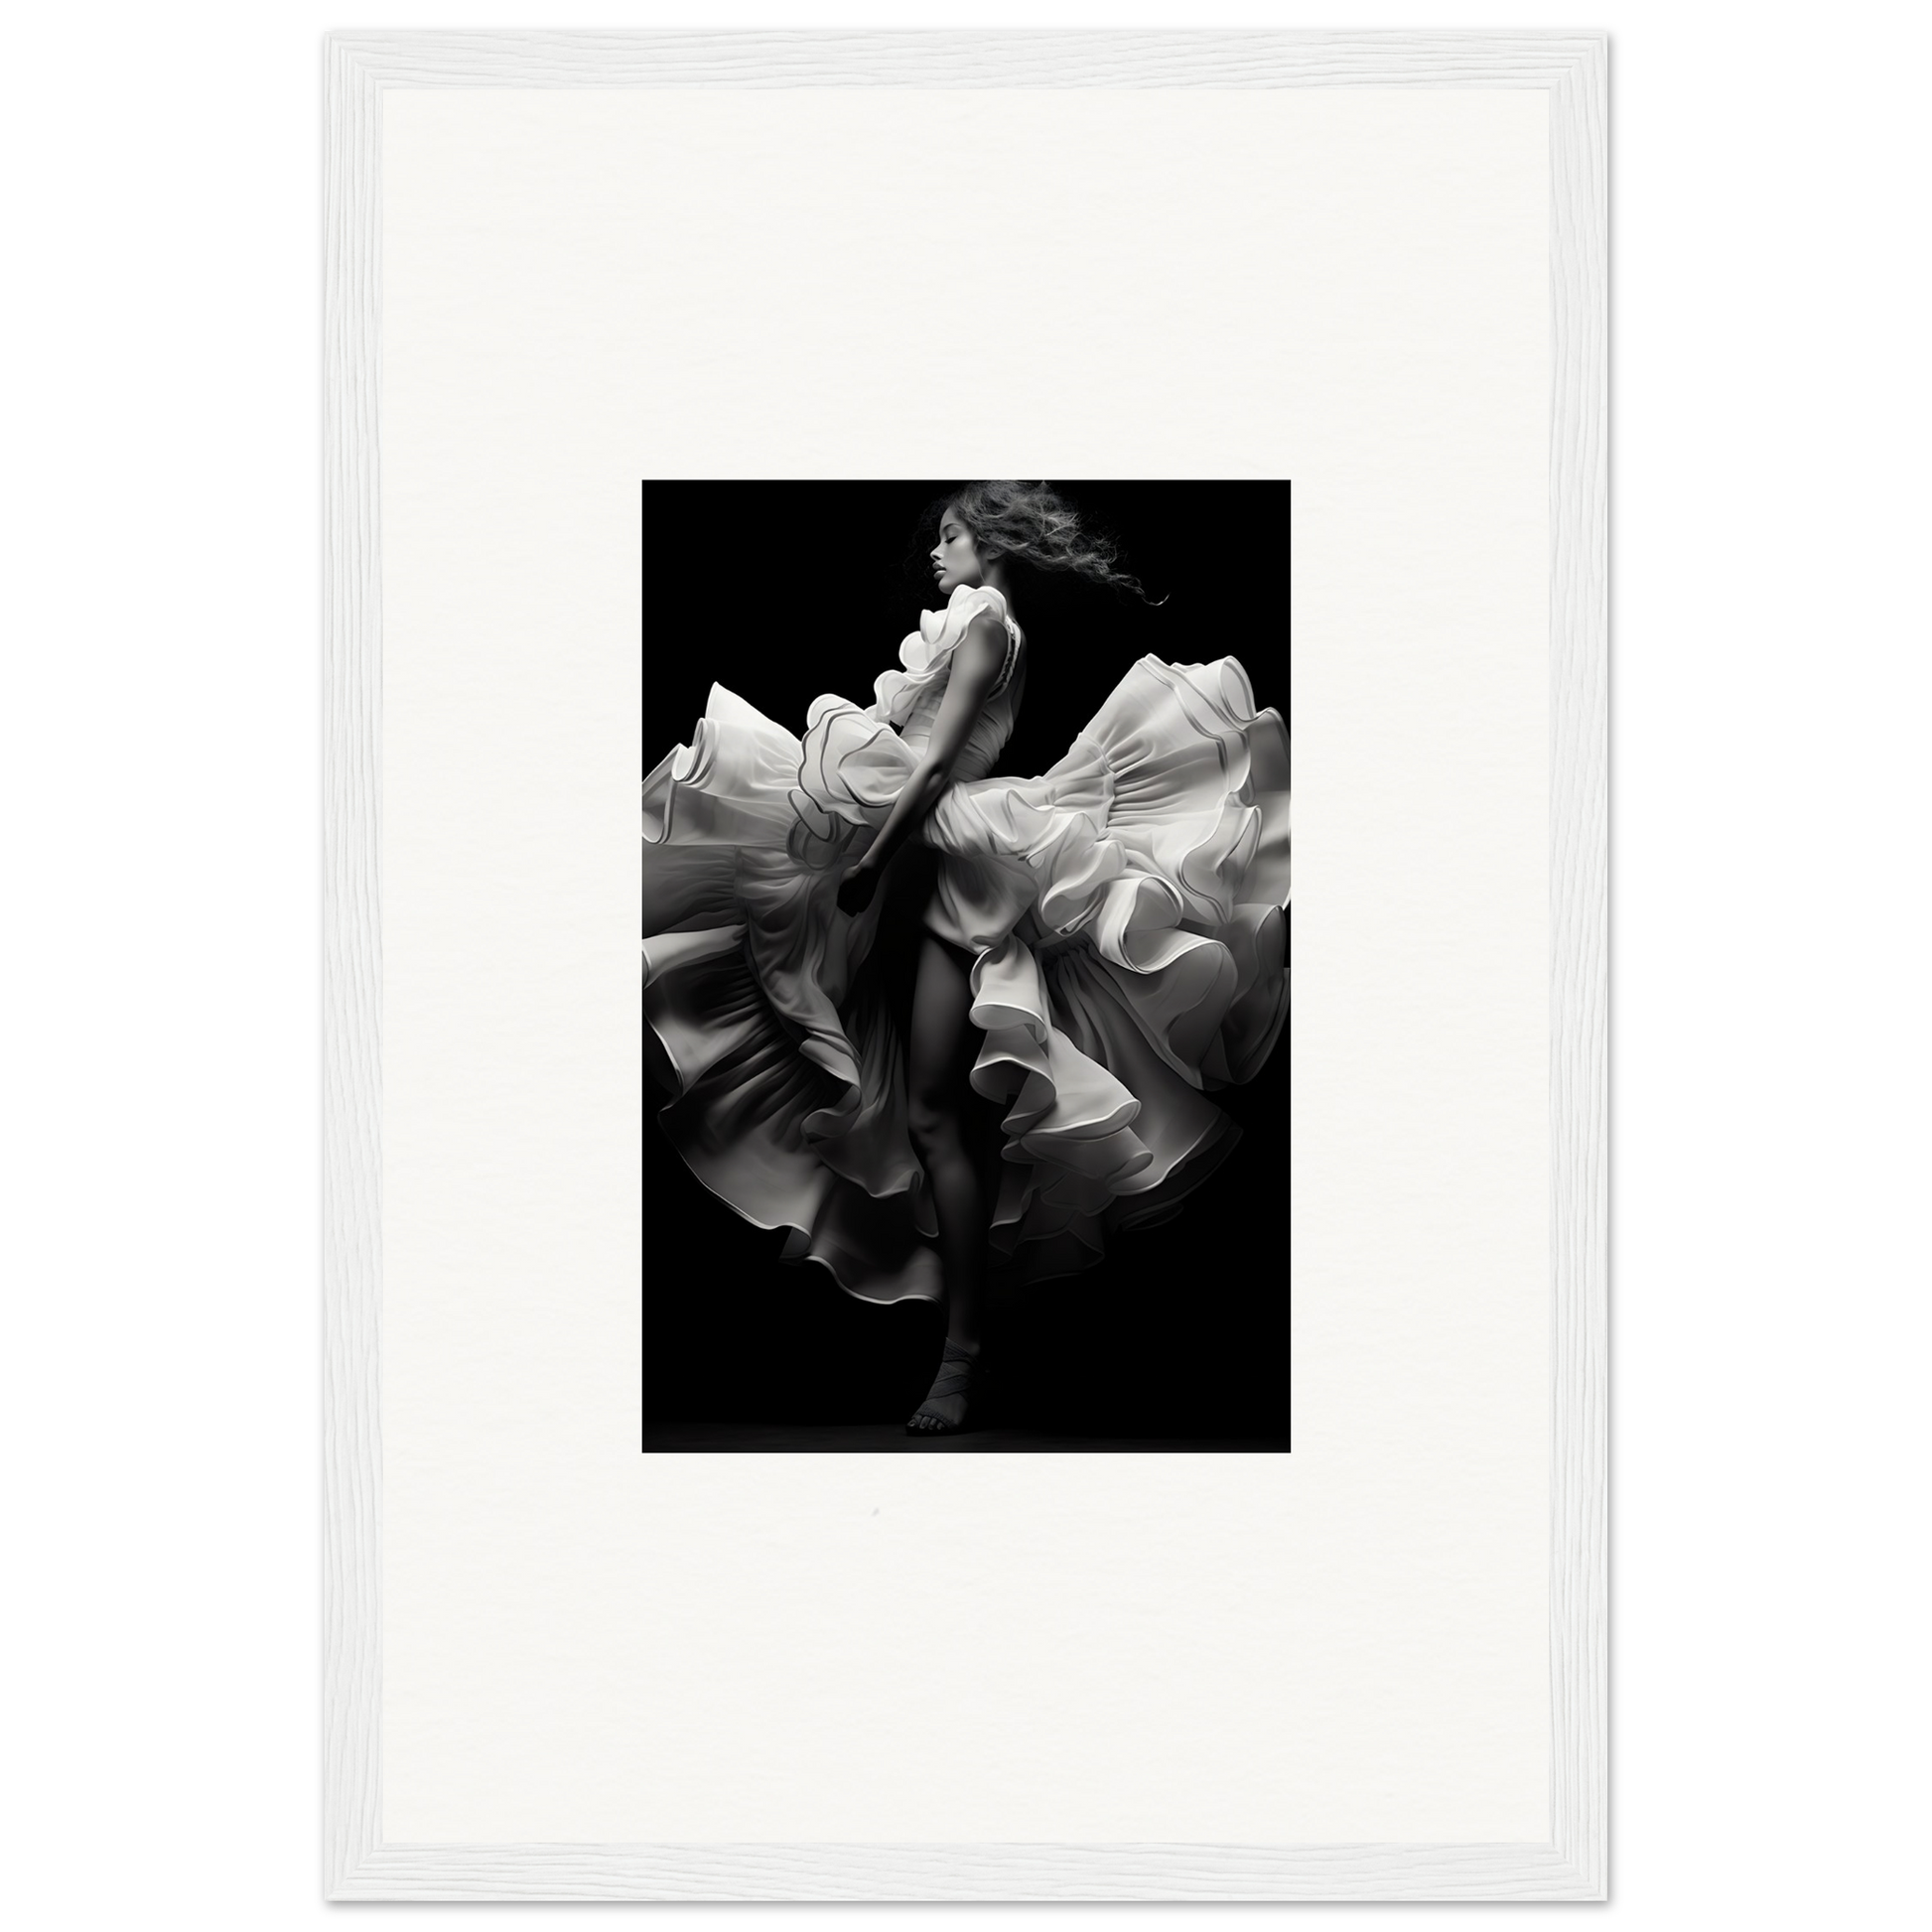 Dancers and time 05p - framed poster - 30x45 cm / 12x18″ /